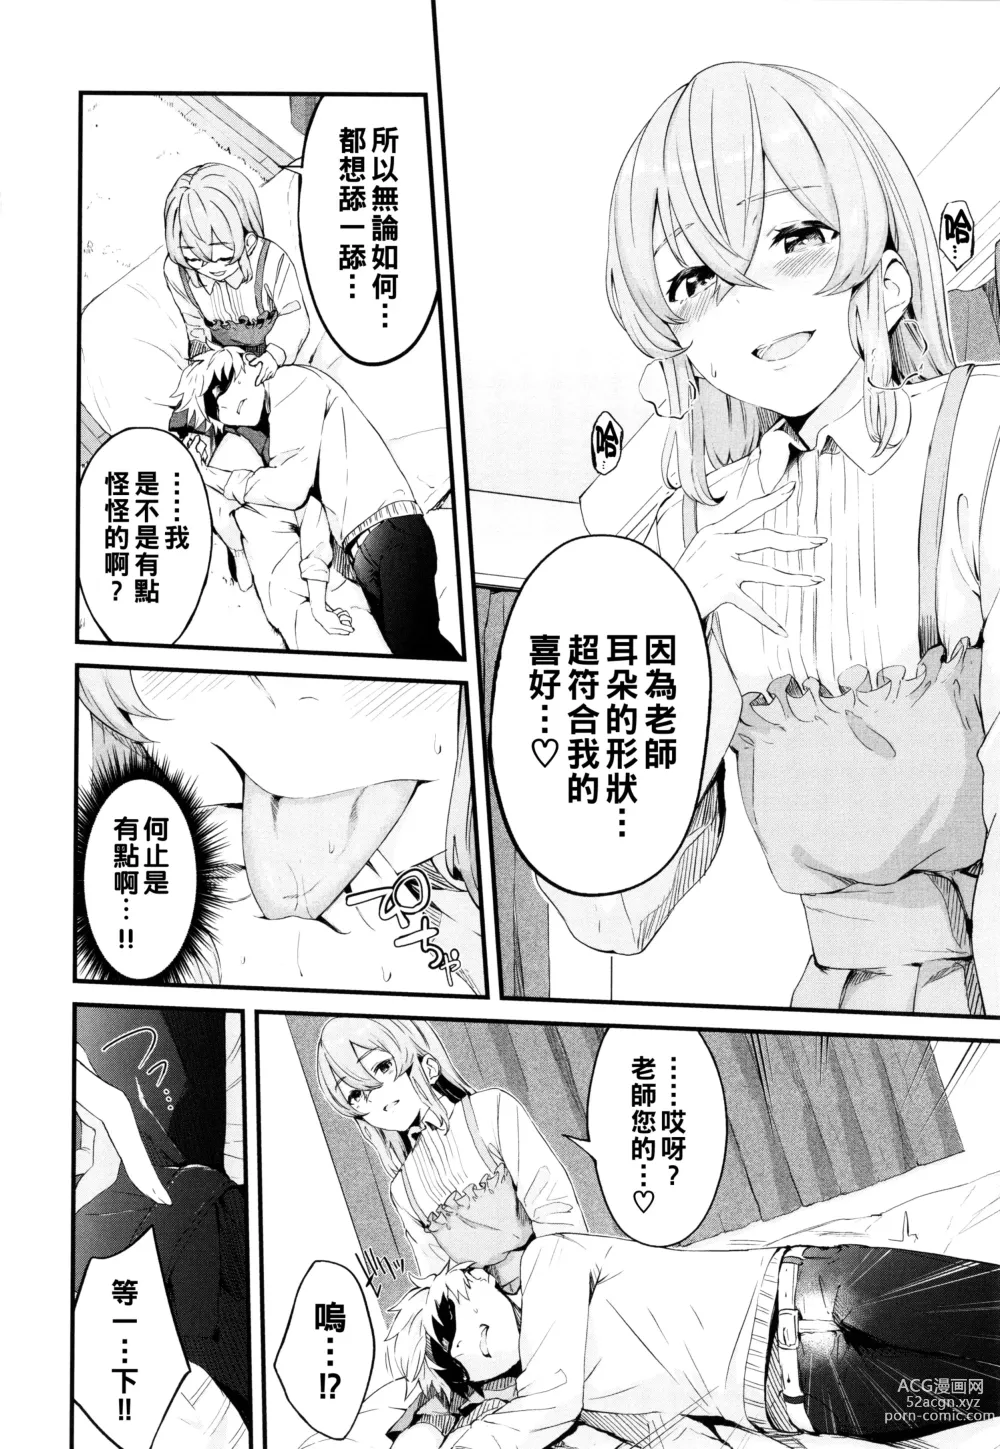 Page 8 of manga Melty Miss